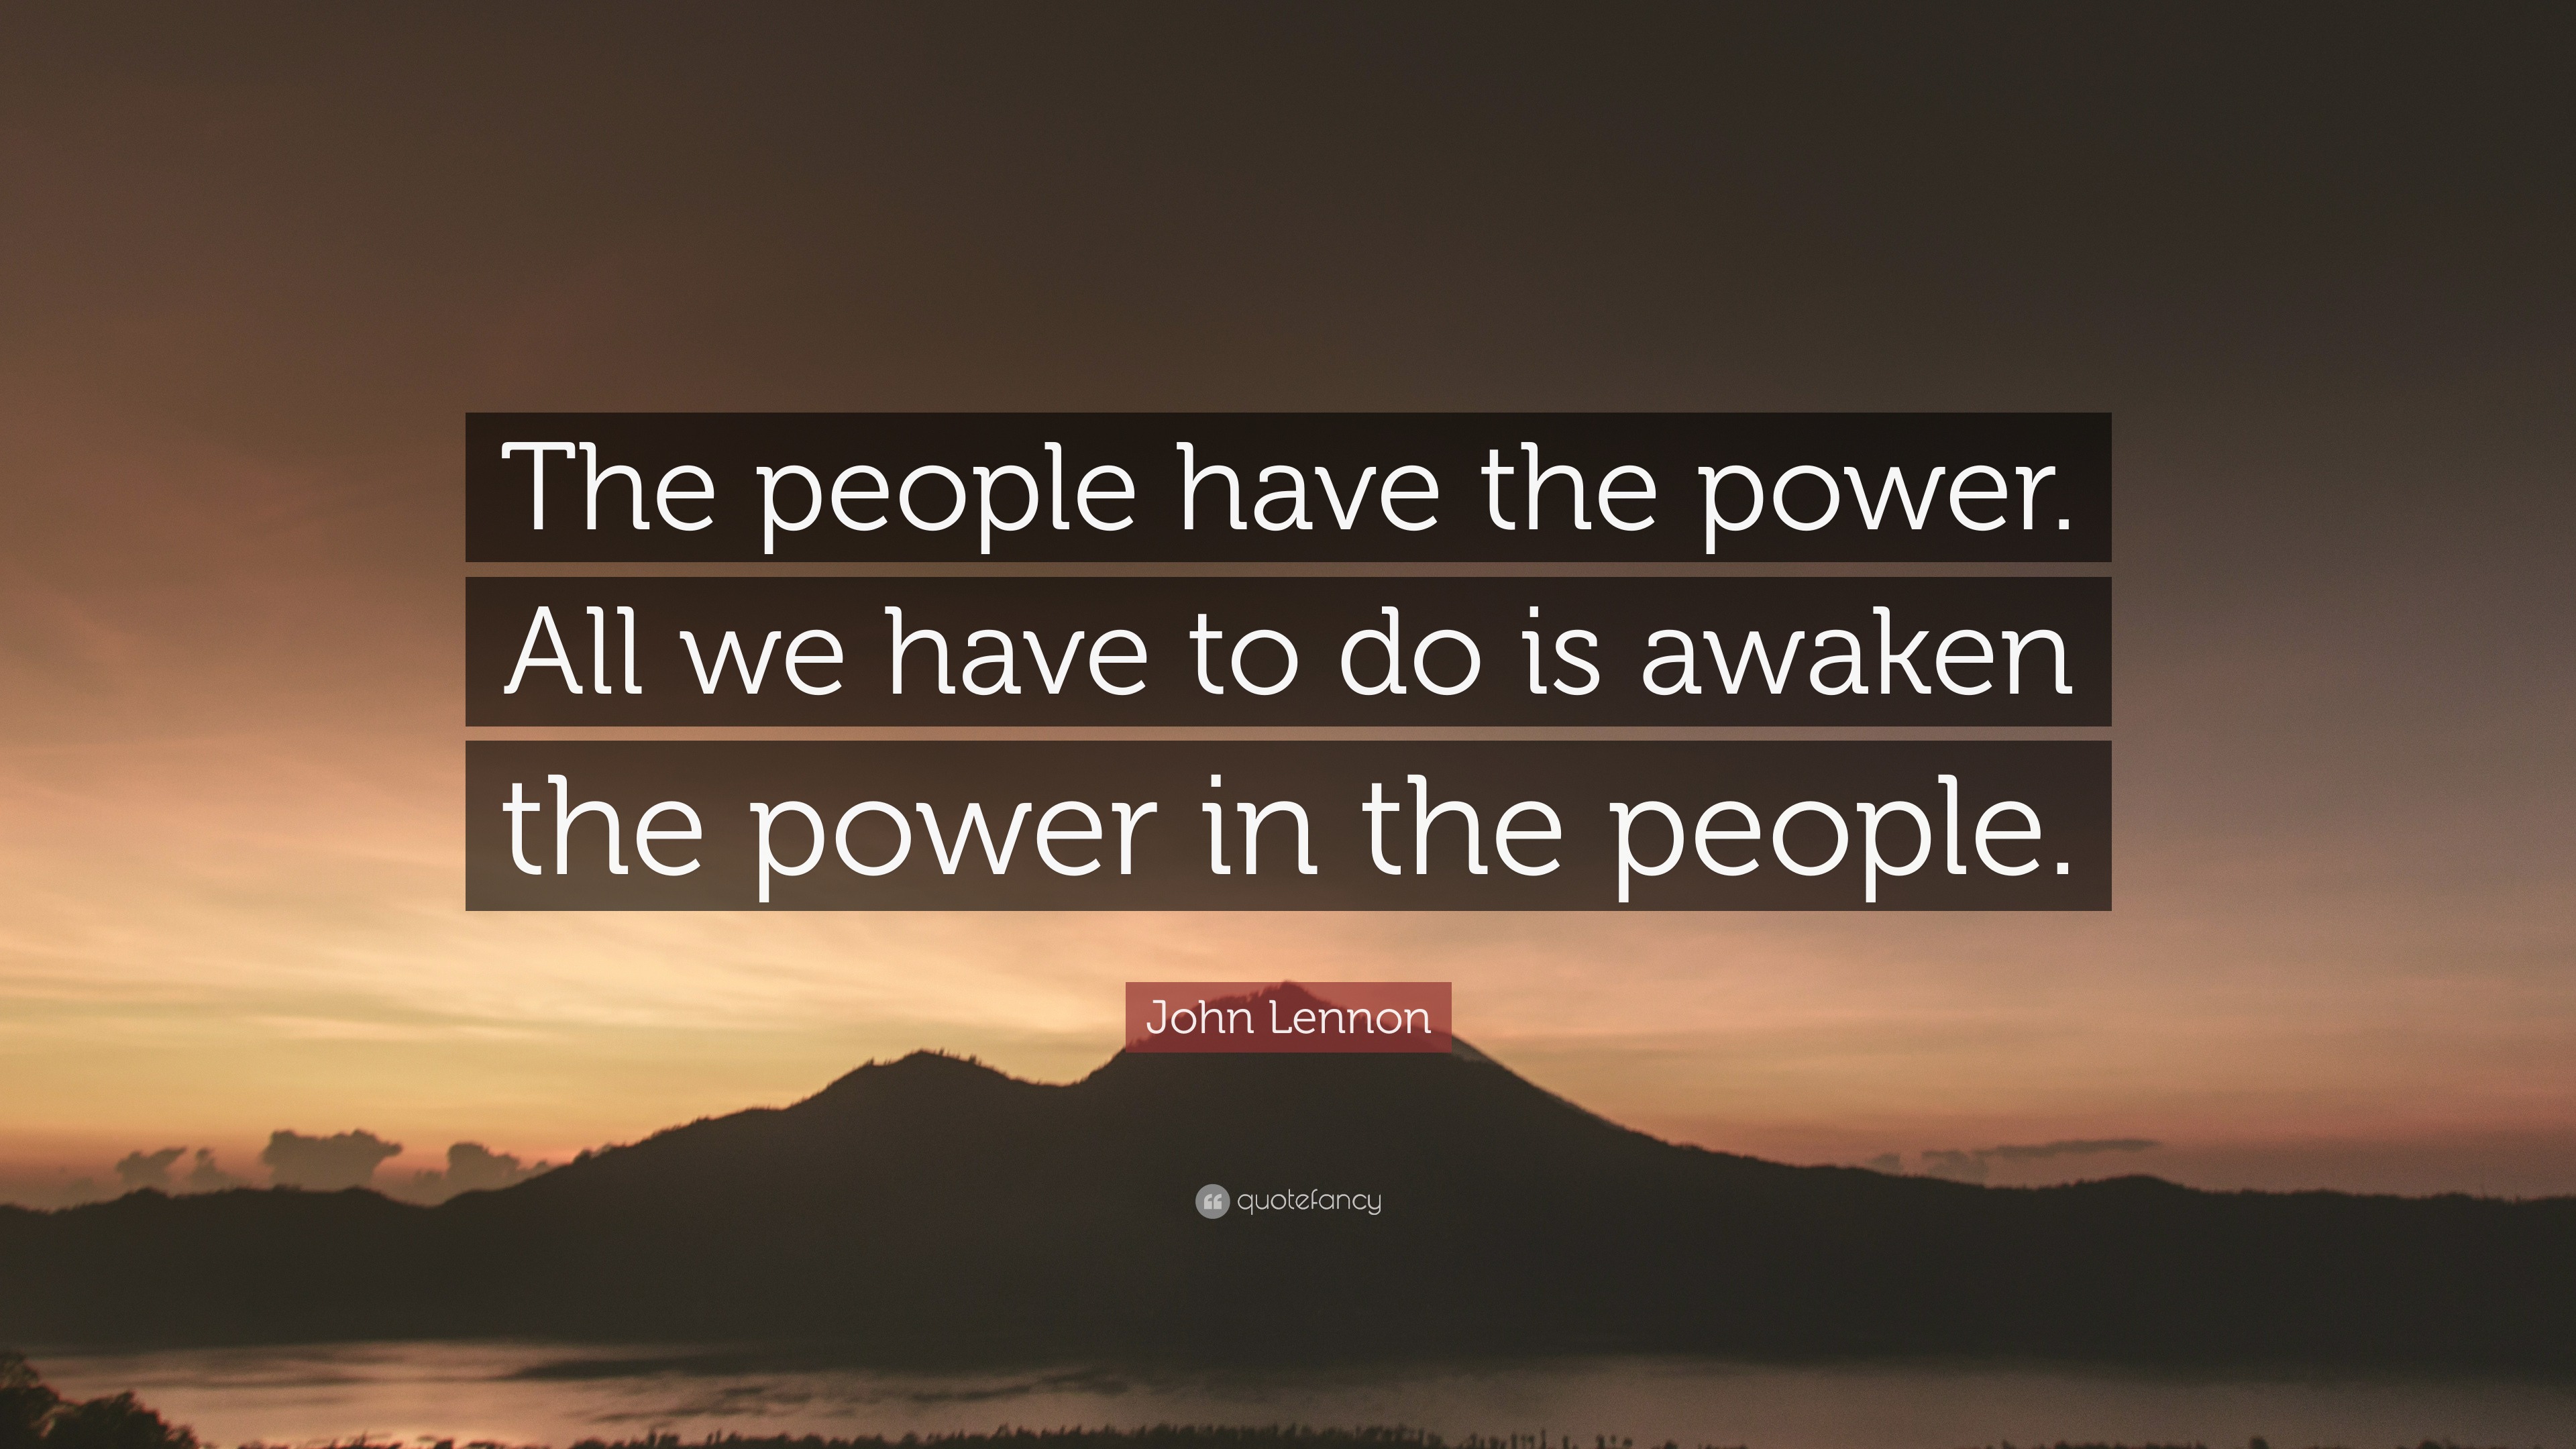 power to the people quote